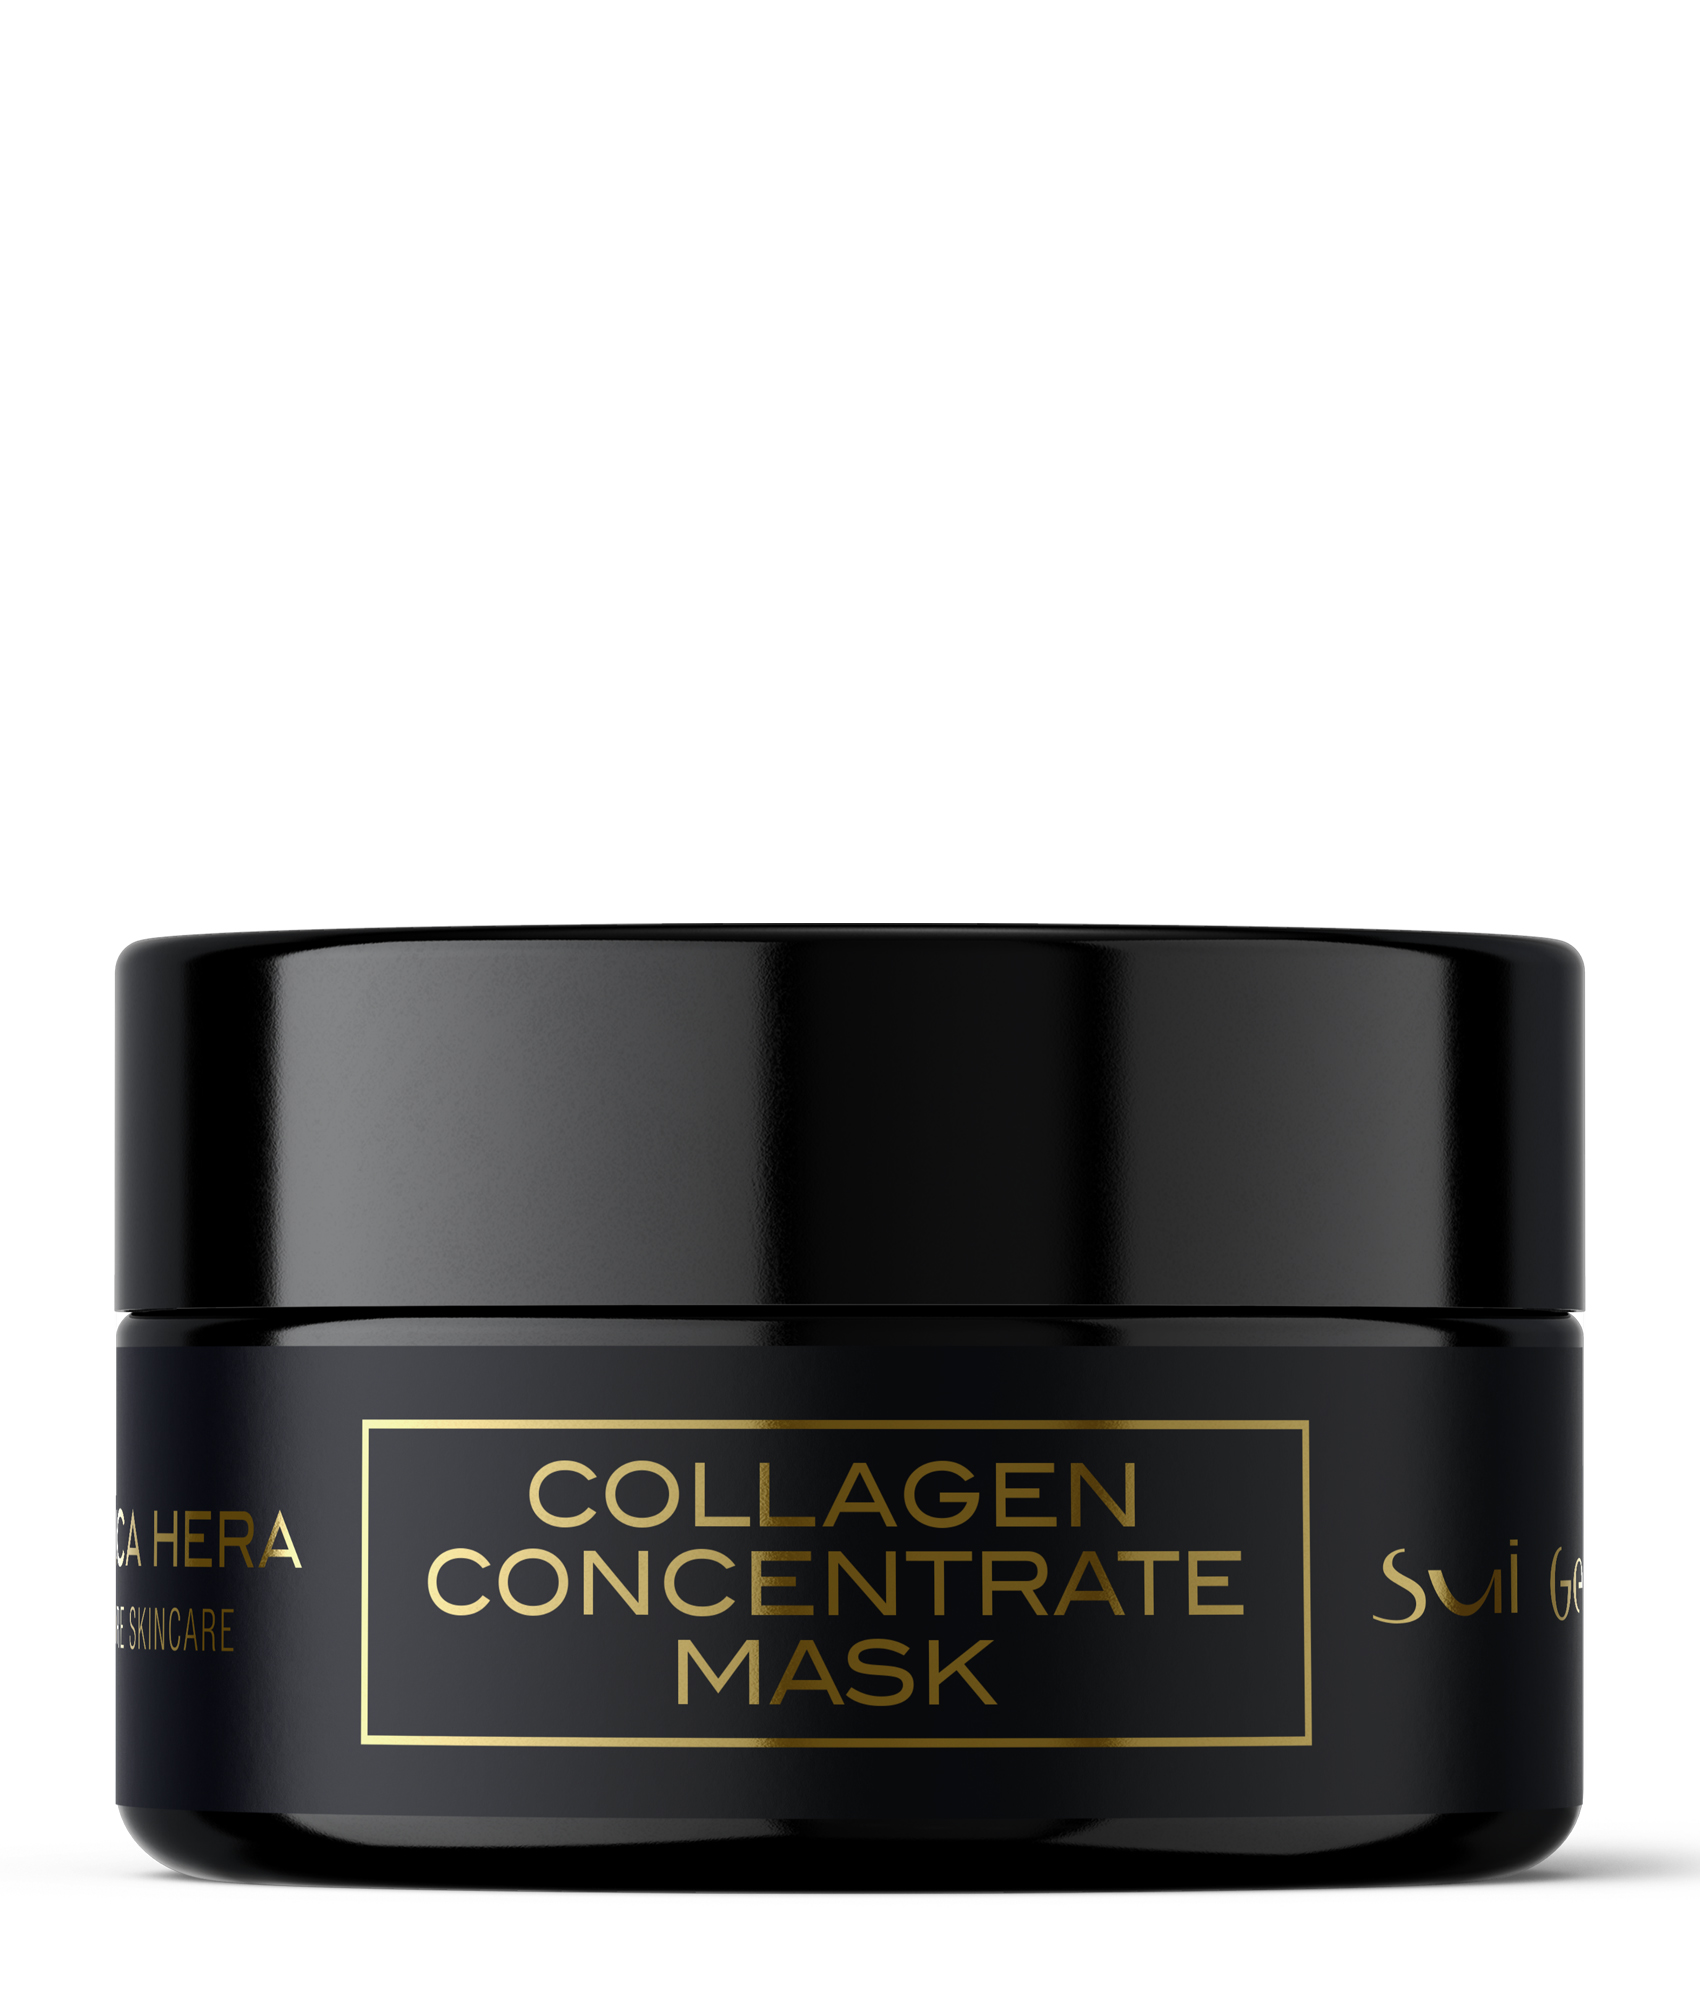 COLLAGEN CONCENTRATE MASK